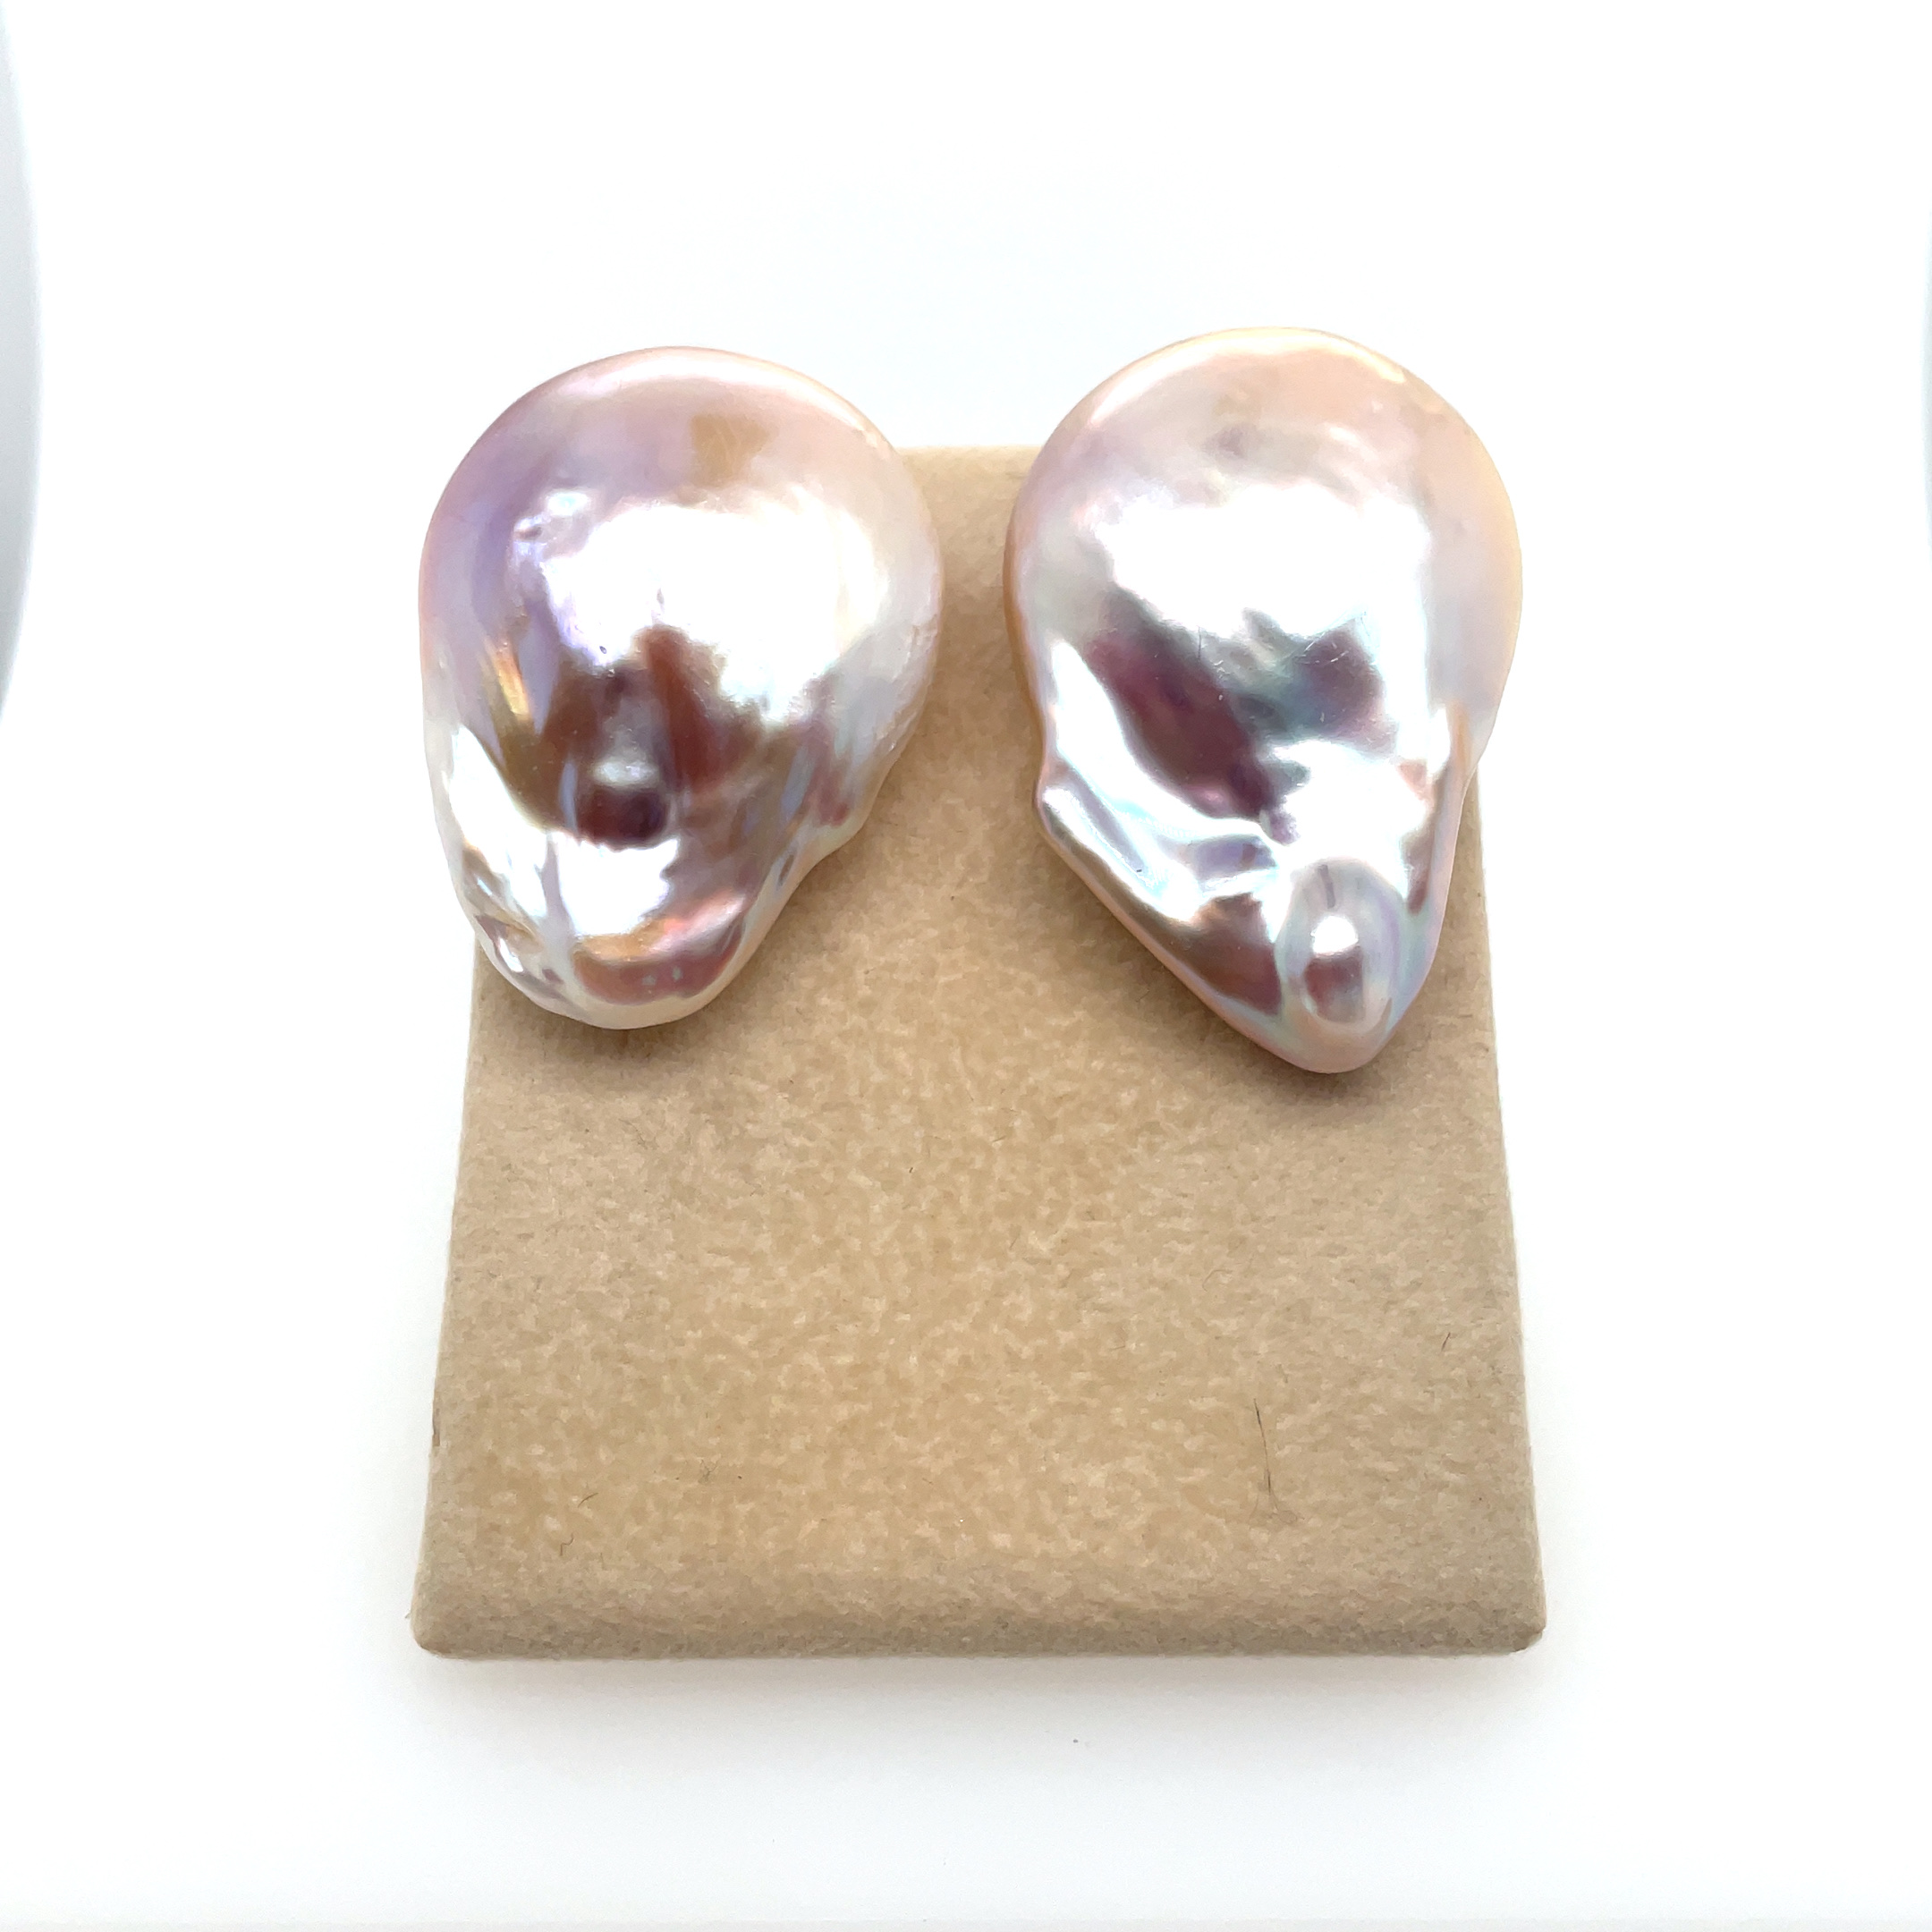 Unusual Giant Sounder Pearl Earrings with 14k Posts and Backs